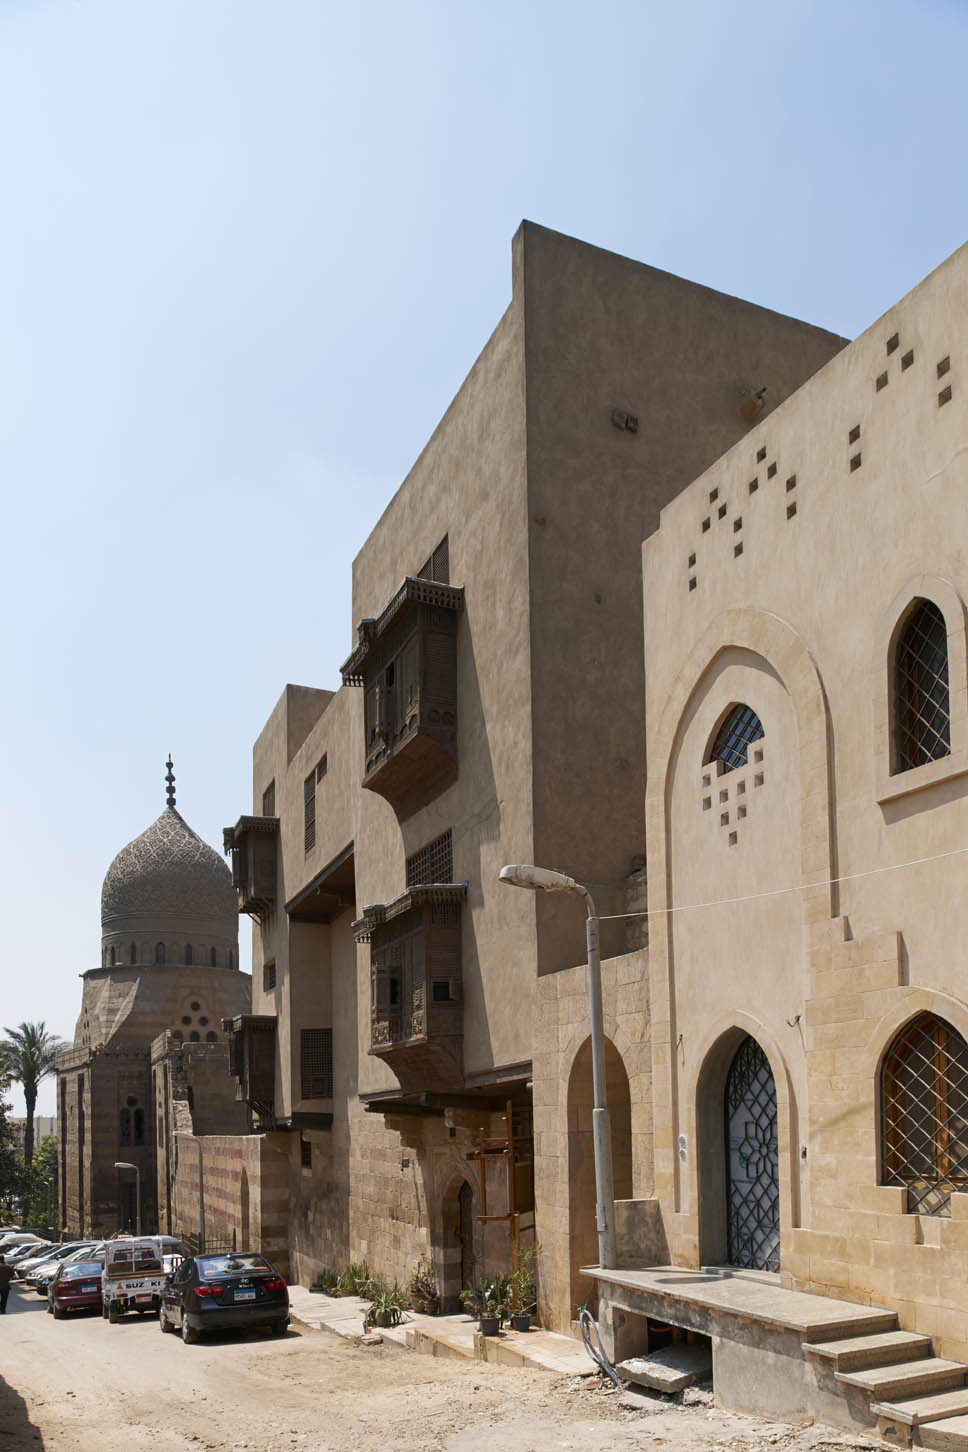 View along street facade, with tomb of Qanibay Amir Akhur in distance